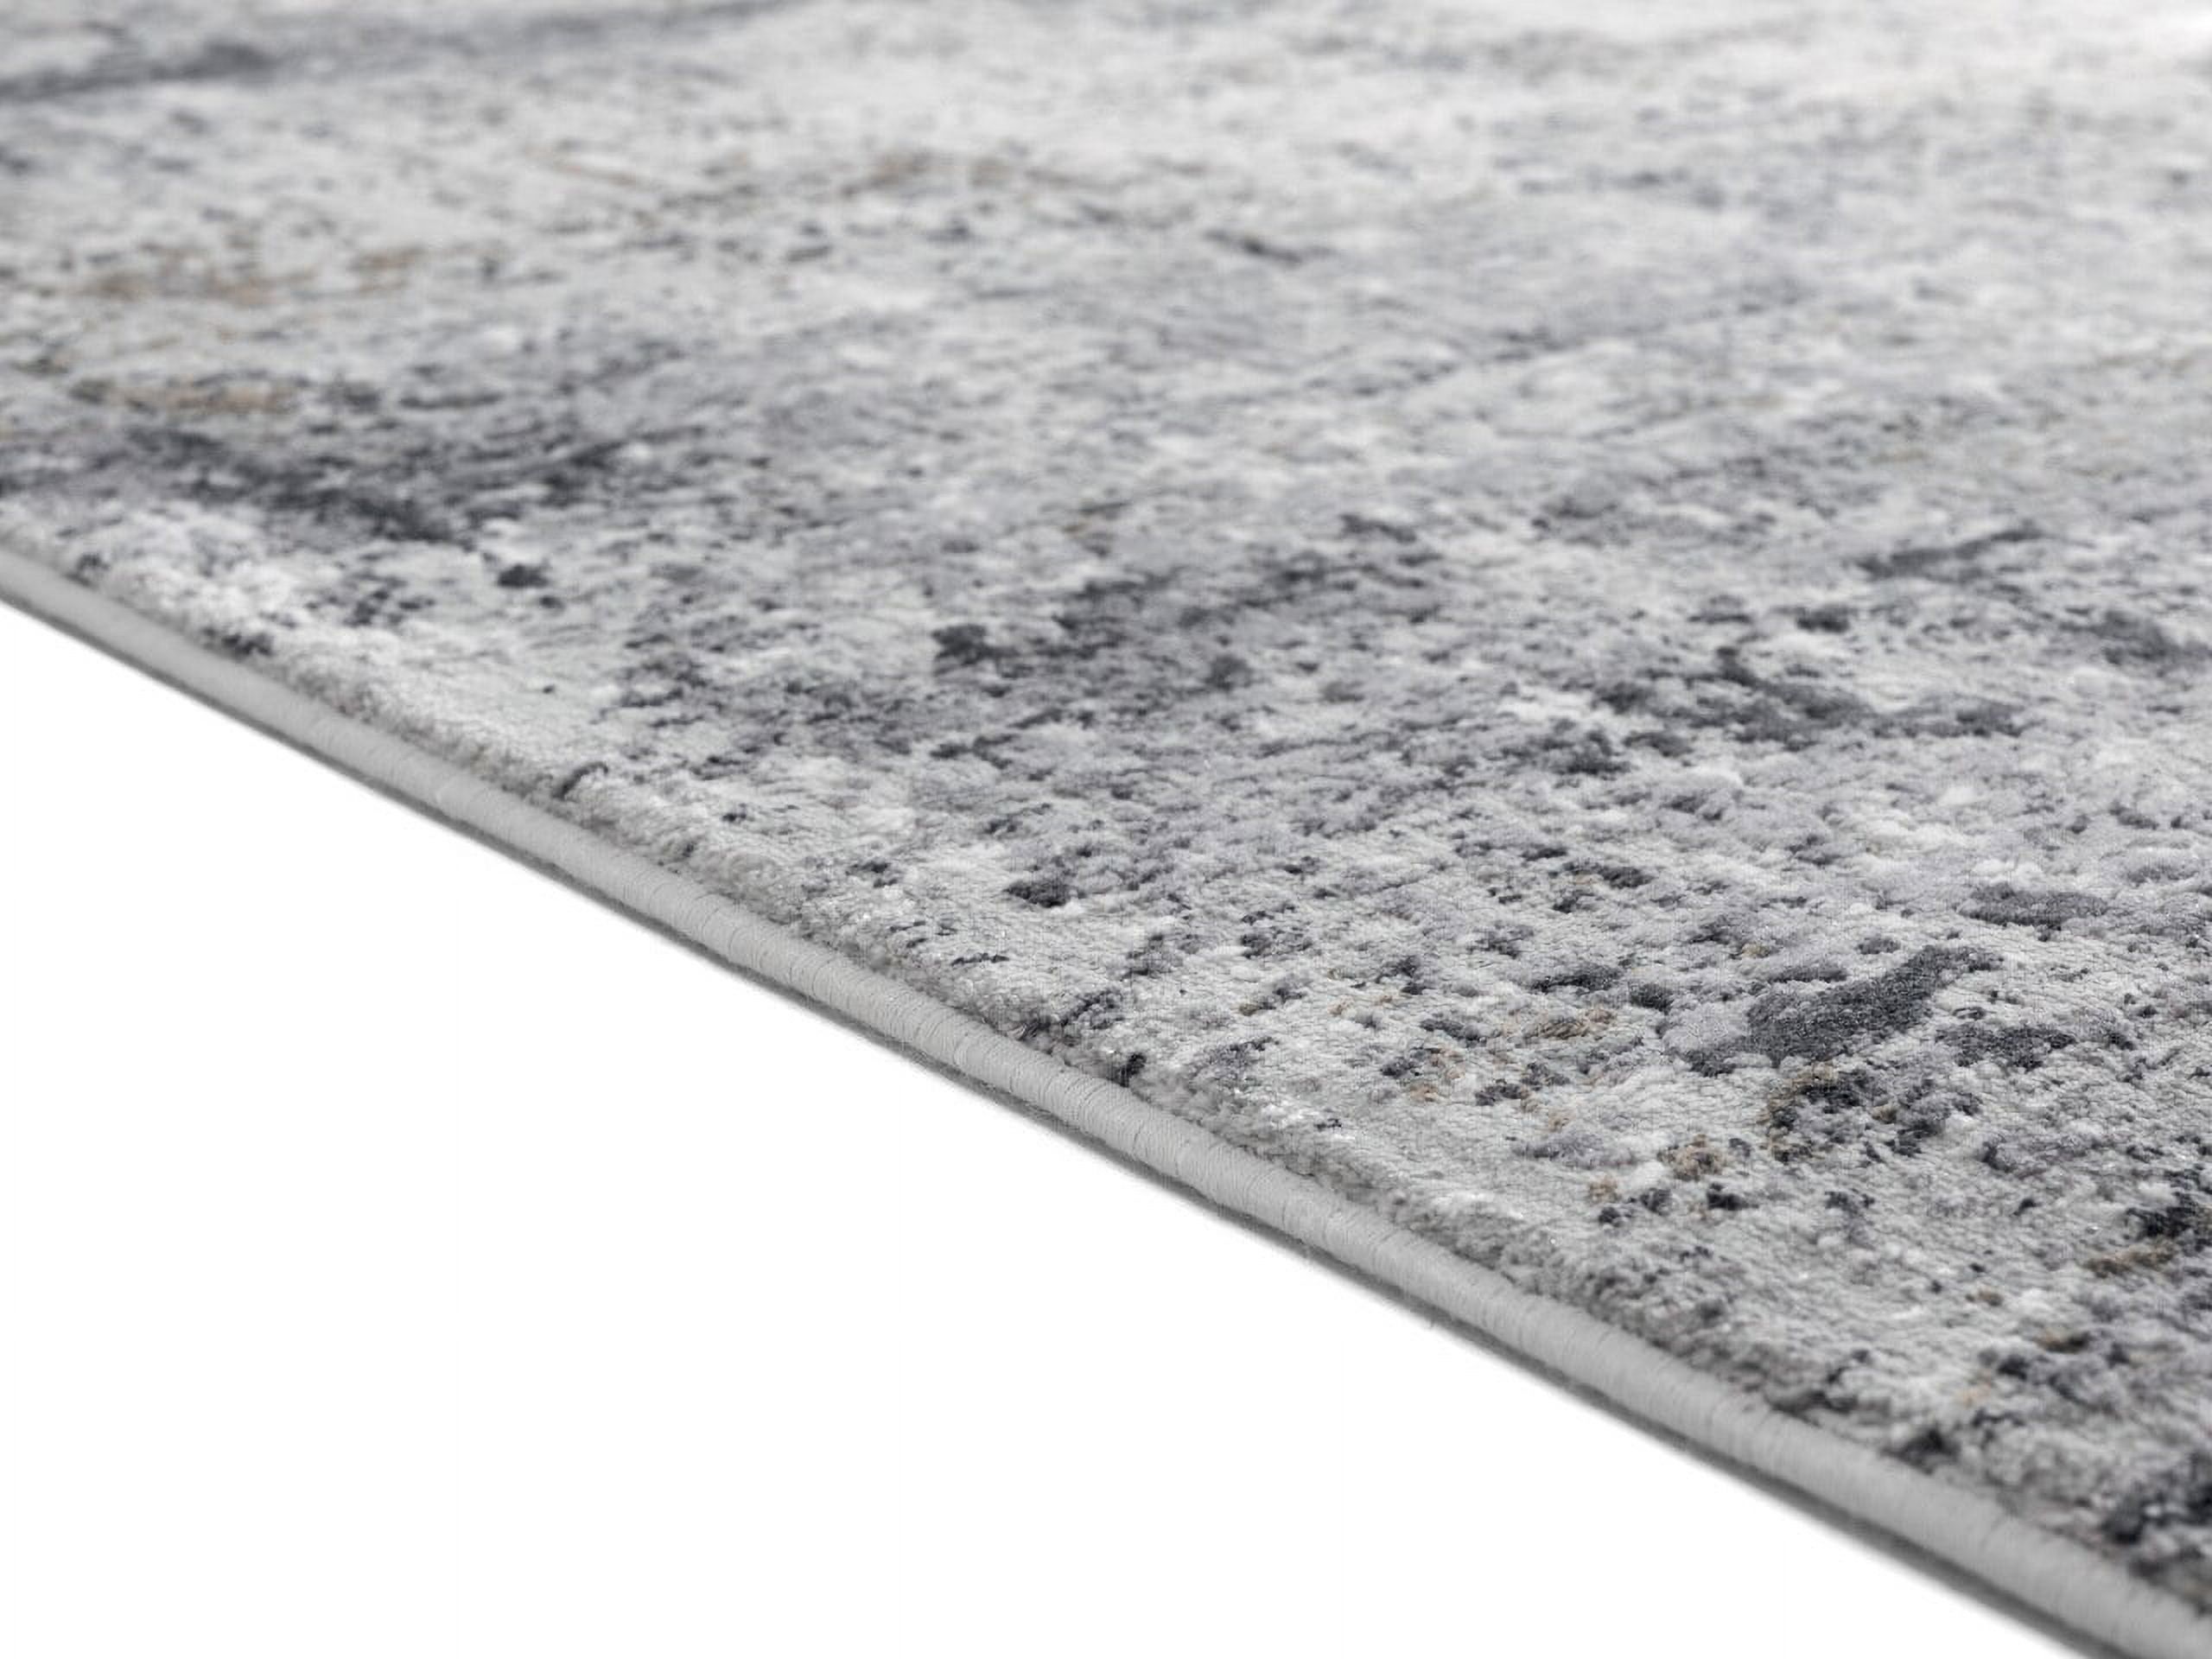 6 x 86" x 0.39" Grey Viscose/Polyester Area Rug - image 2 of 2